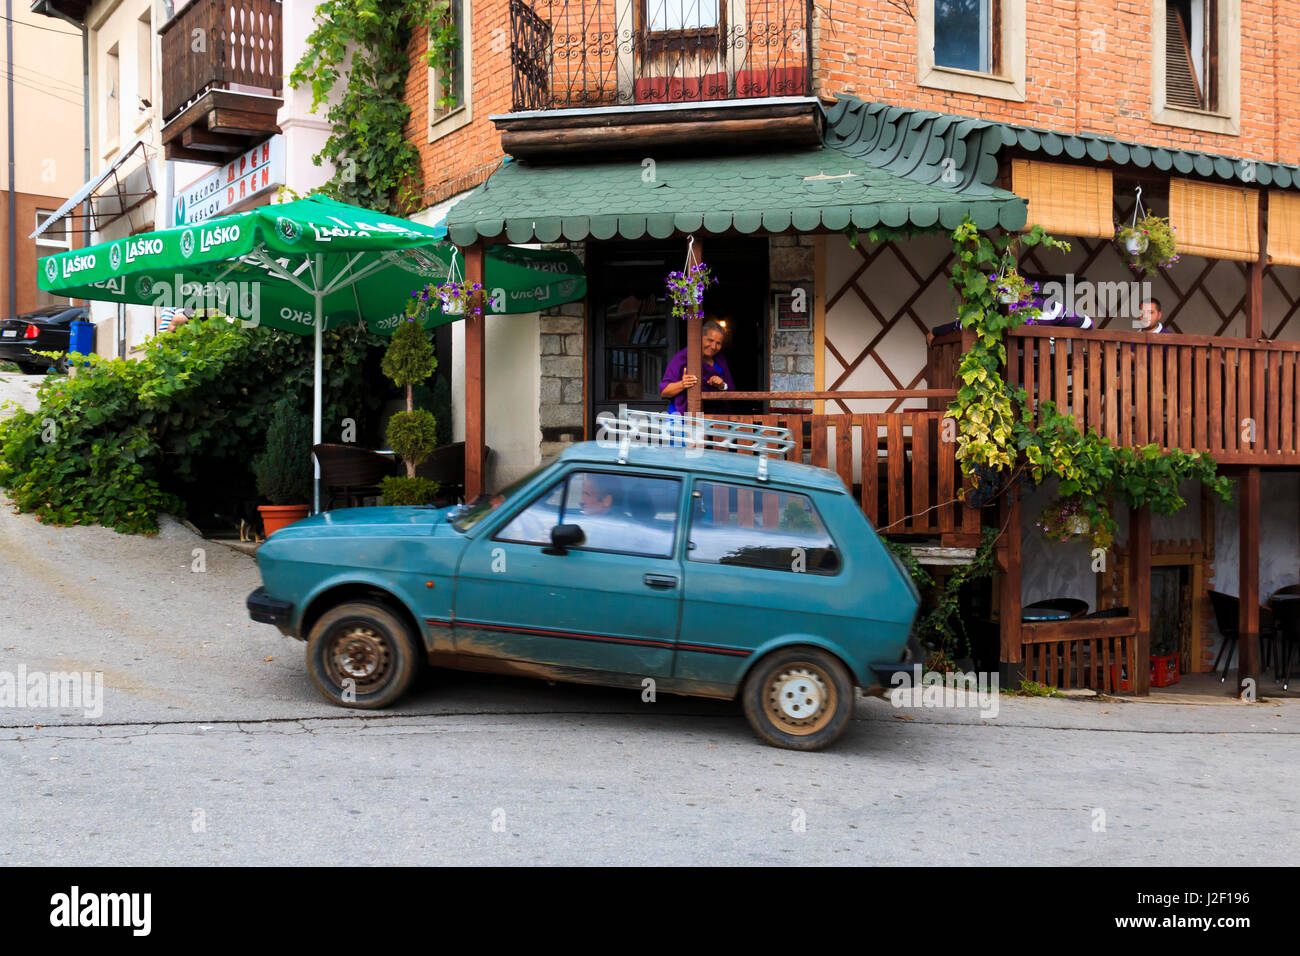 Village of Vevcani is in the Jablanica Mountains, near the town of Struga. Vevcani Springs start here. Gray-blue Yugo car outside restaurant. (Editorial Use Only) Stock Photo